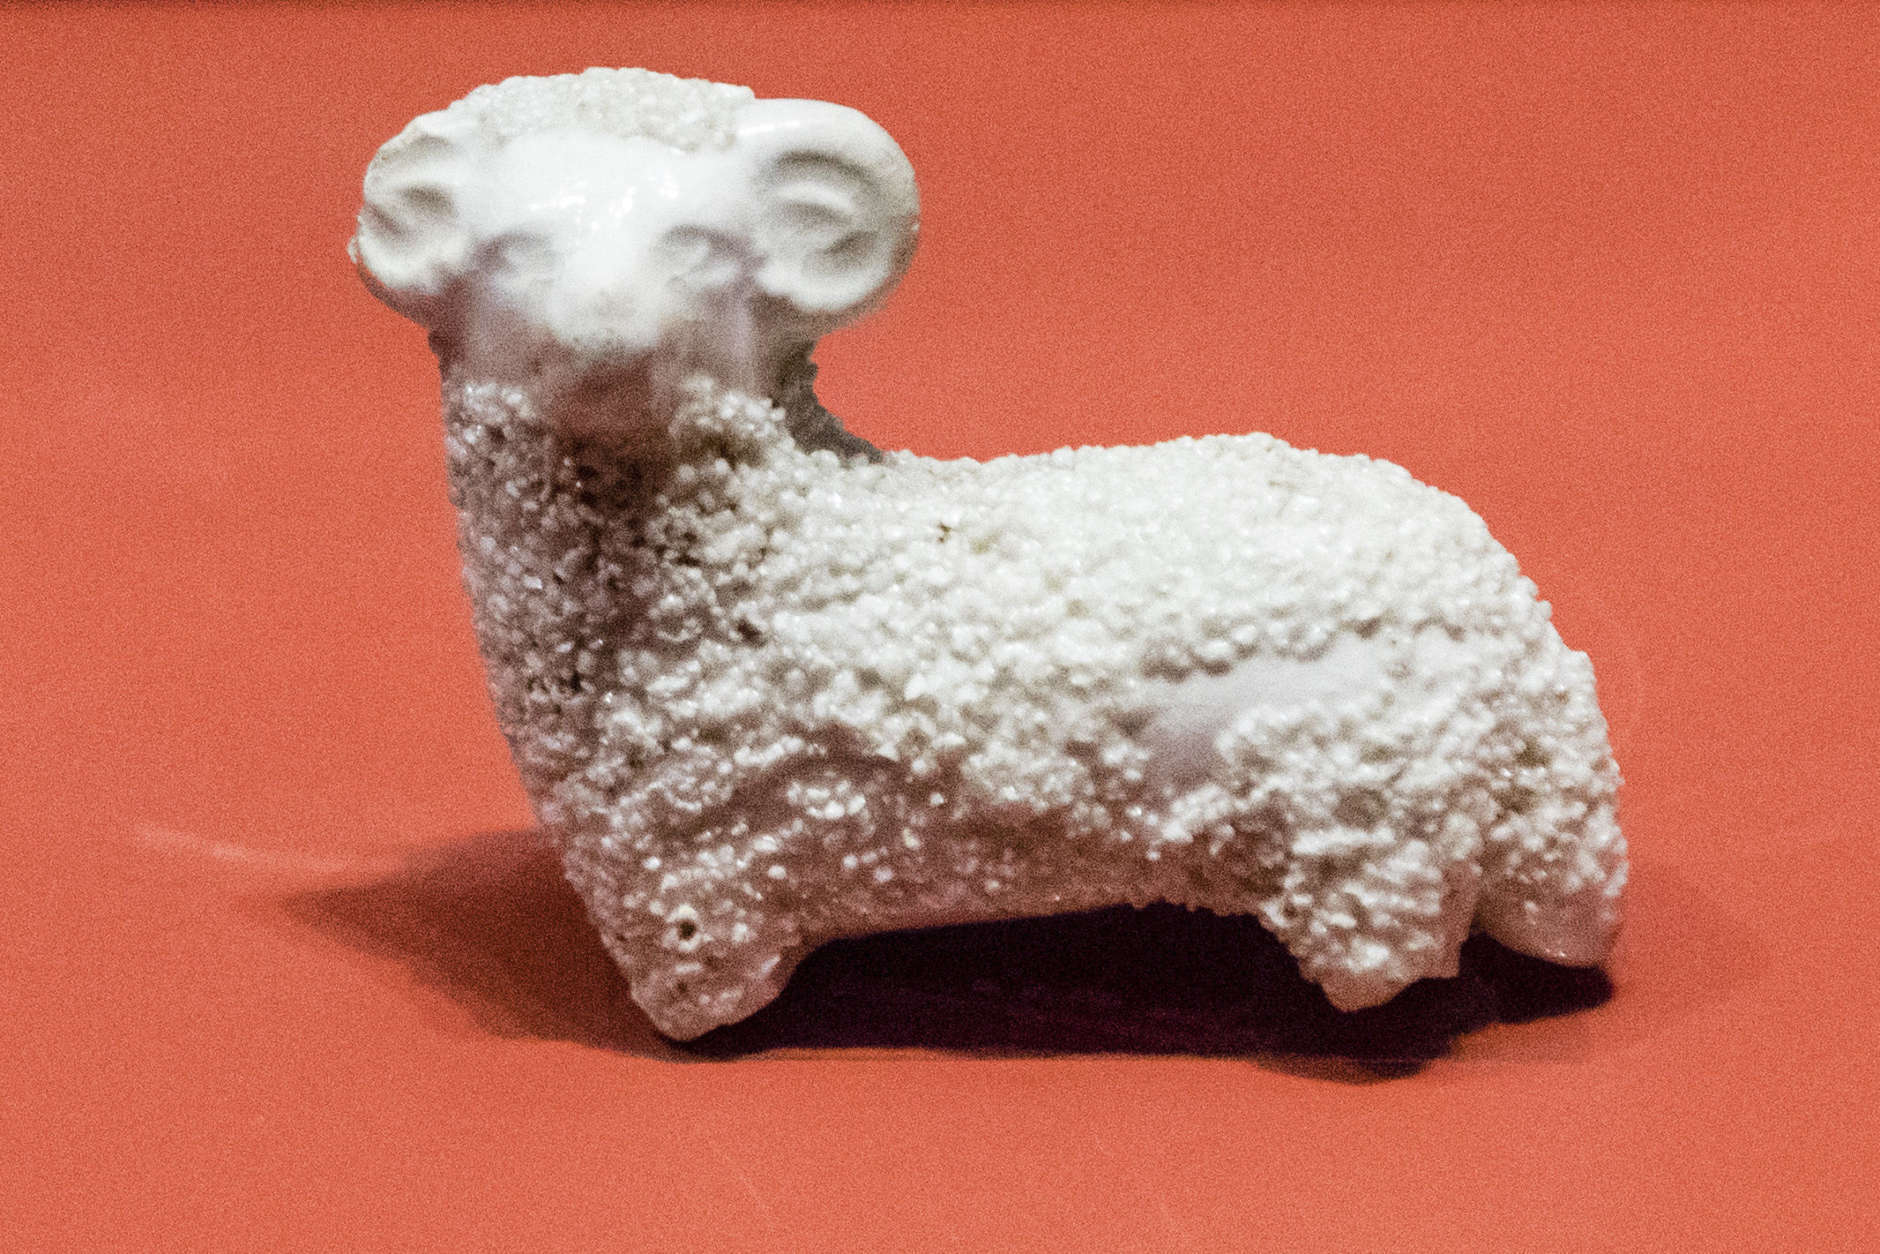 This Tuesday, April 4, 2017, photo shows a child's toy stoneware lamb excavated from a British Revolutionary War campsite near New York City, at the Museum of the American Revolution in Philadelphia. Approximately 10 percent of British soldiers who arrived in New York in 1776 had their wives and children with them. (AP Photo/Matt Rourke)